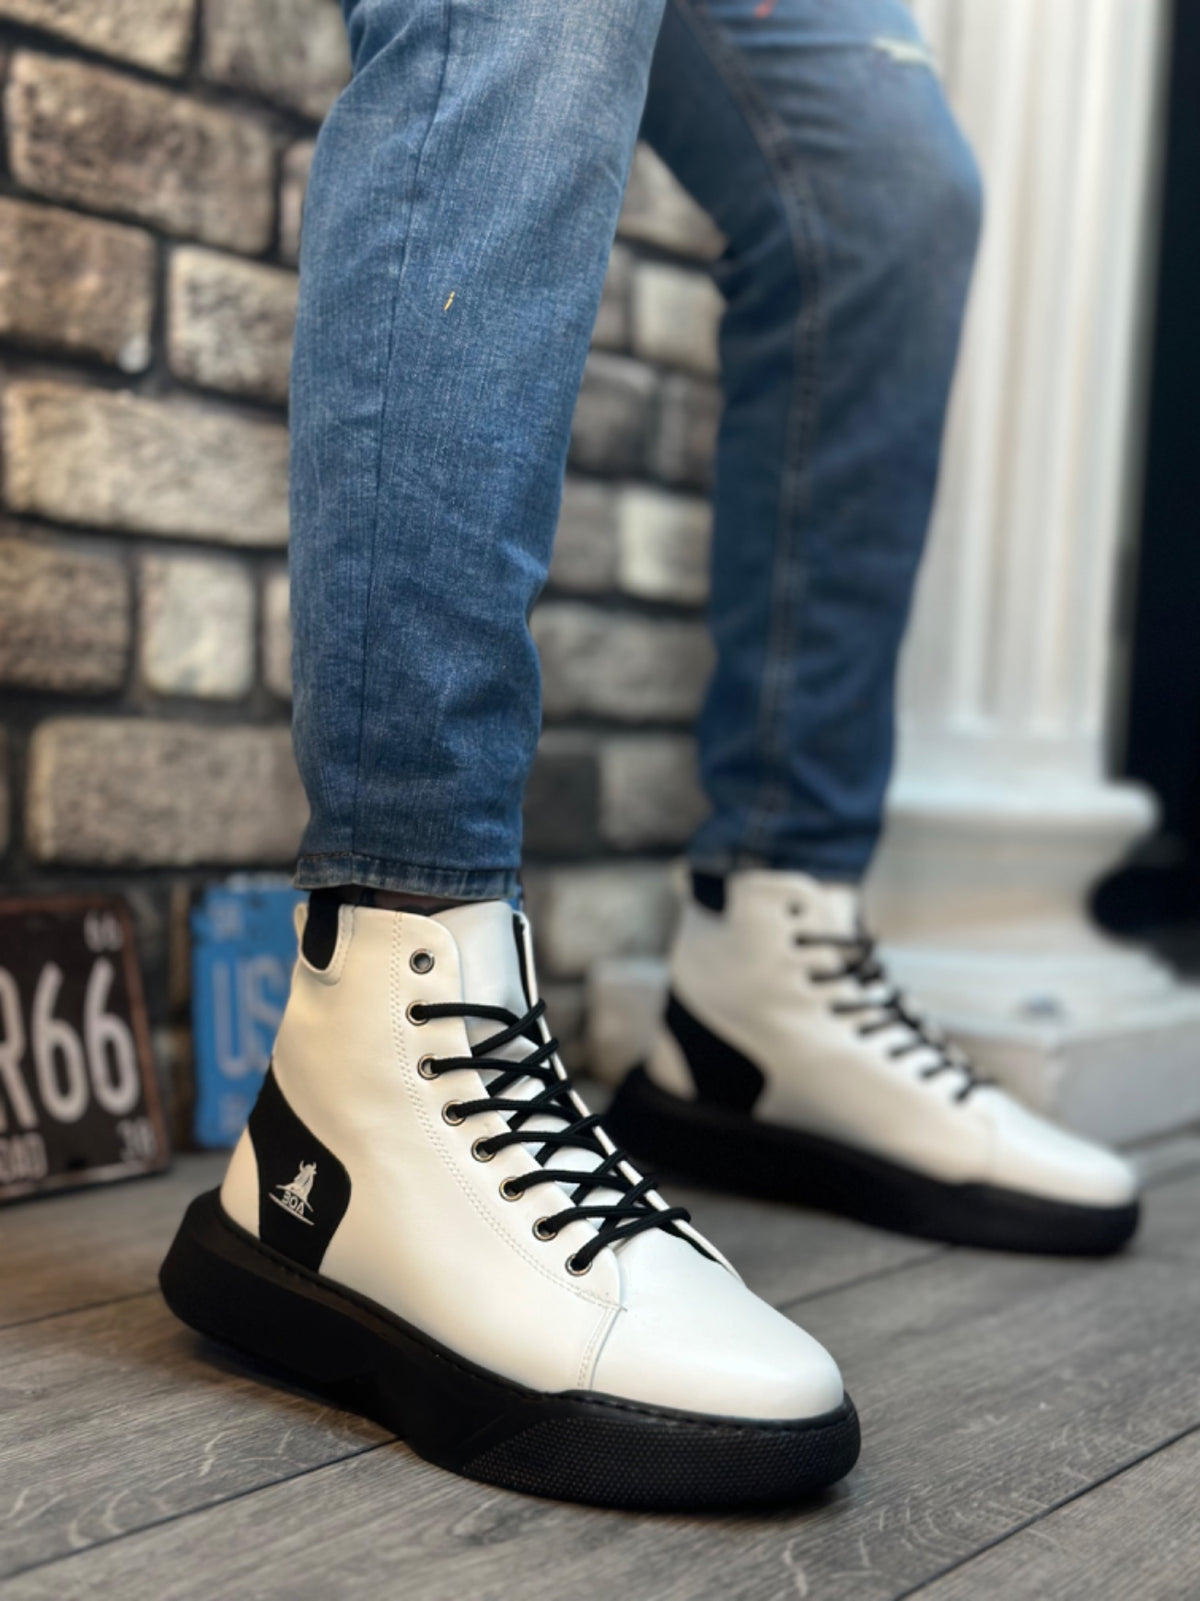 BA0155 Lace-Up Men's High Sole White Black Sole Sport Boots - STREETMODE™